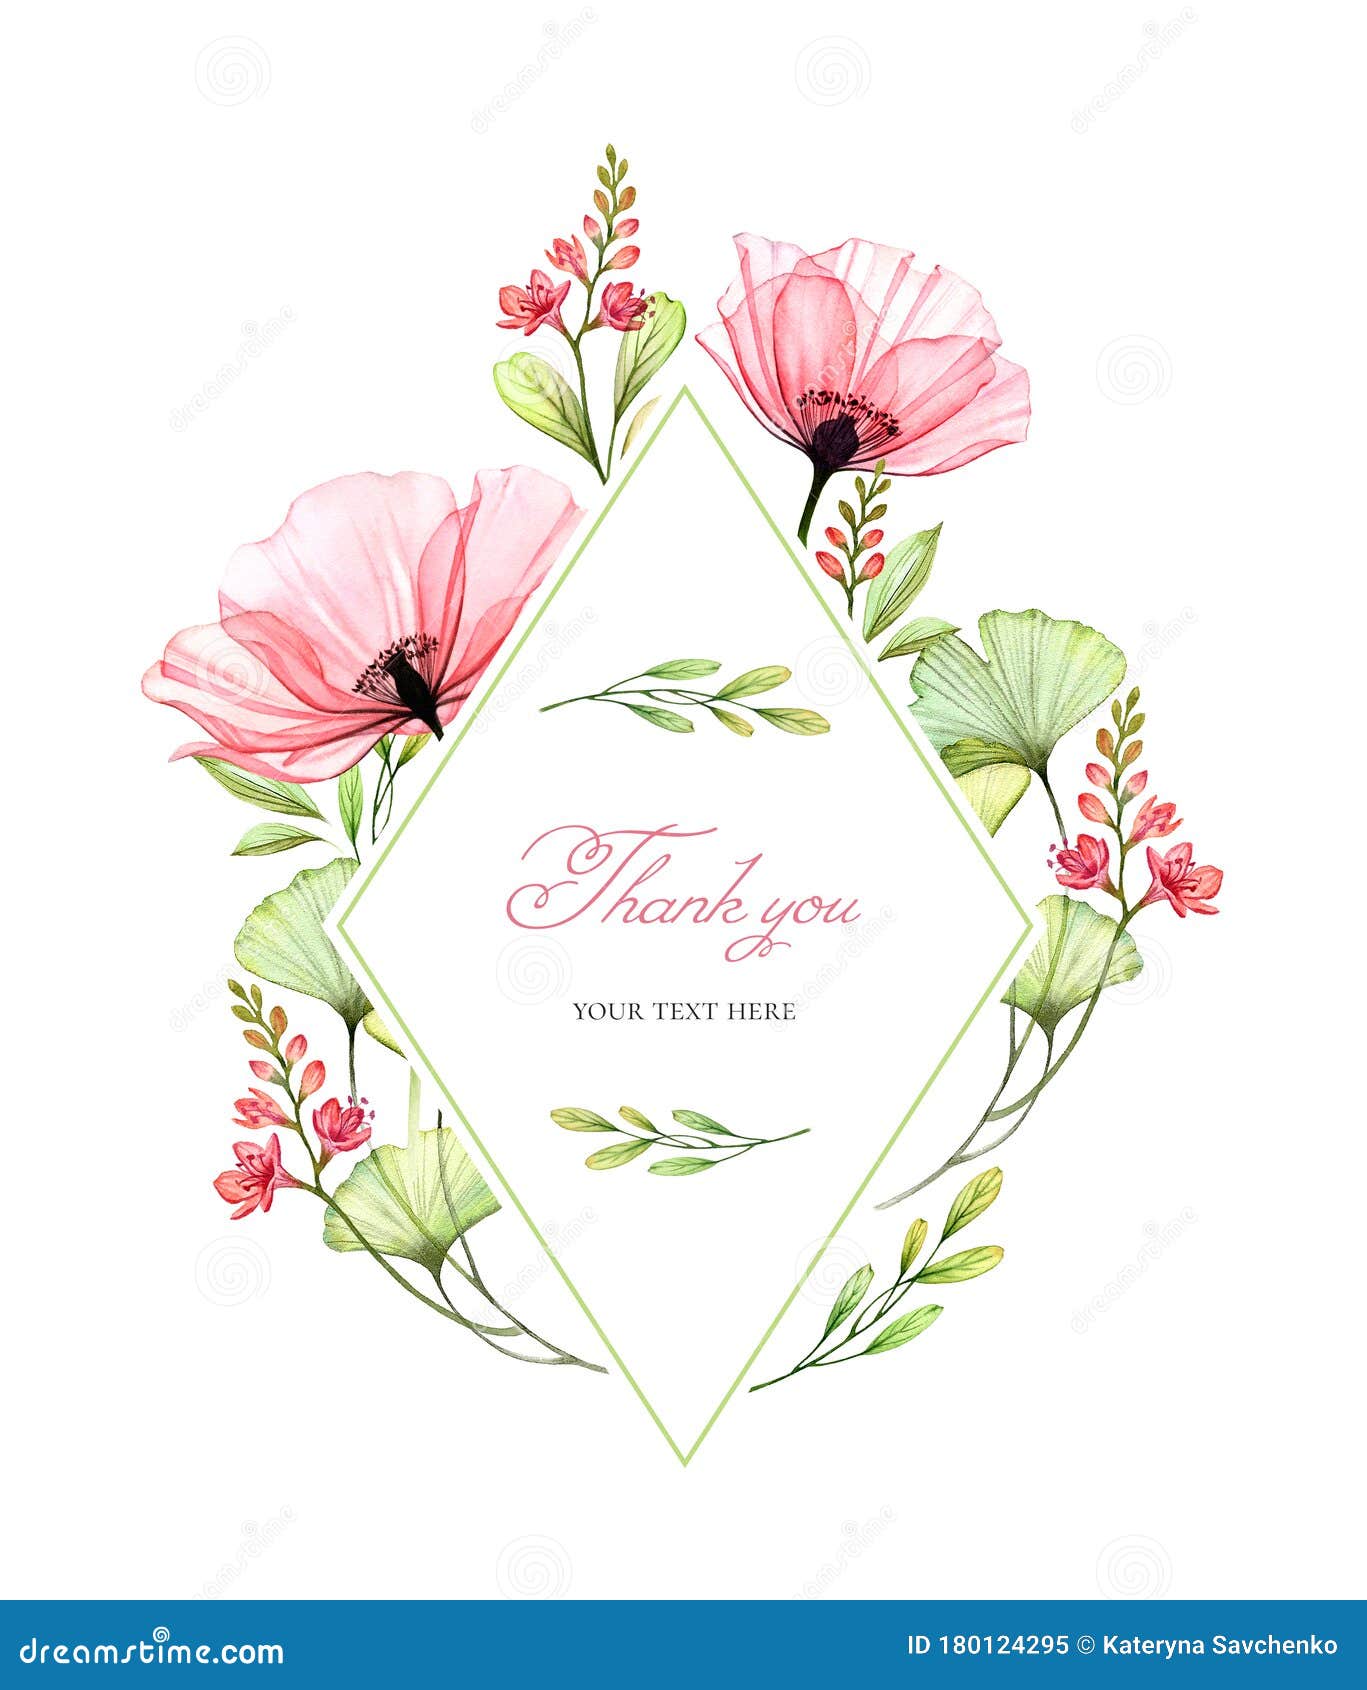 watercolor floral card template. vertical rhomb frame. transparent poppy flowers and thank you text. hand painted spring